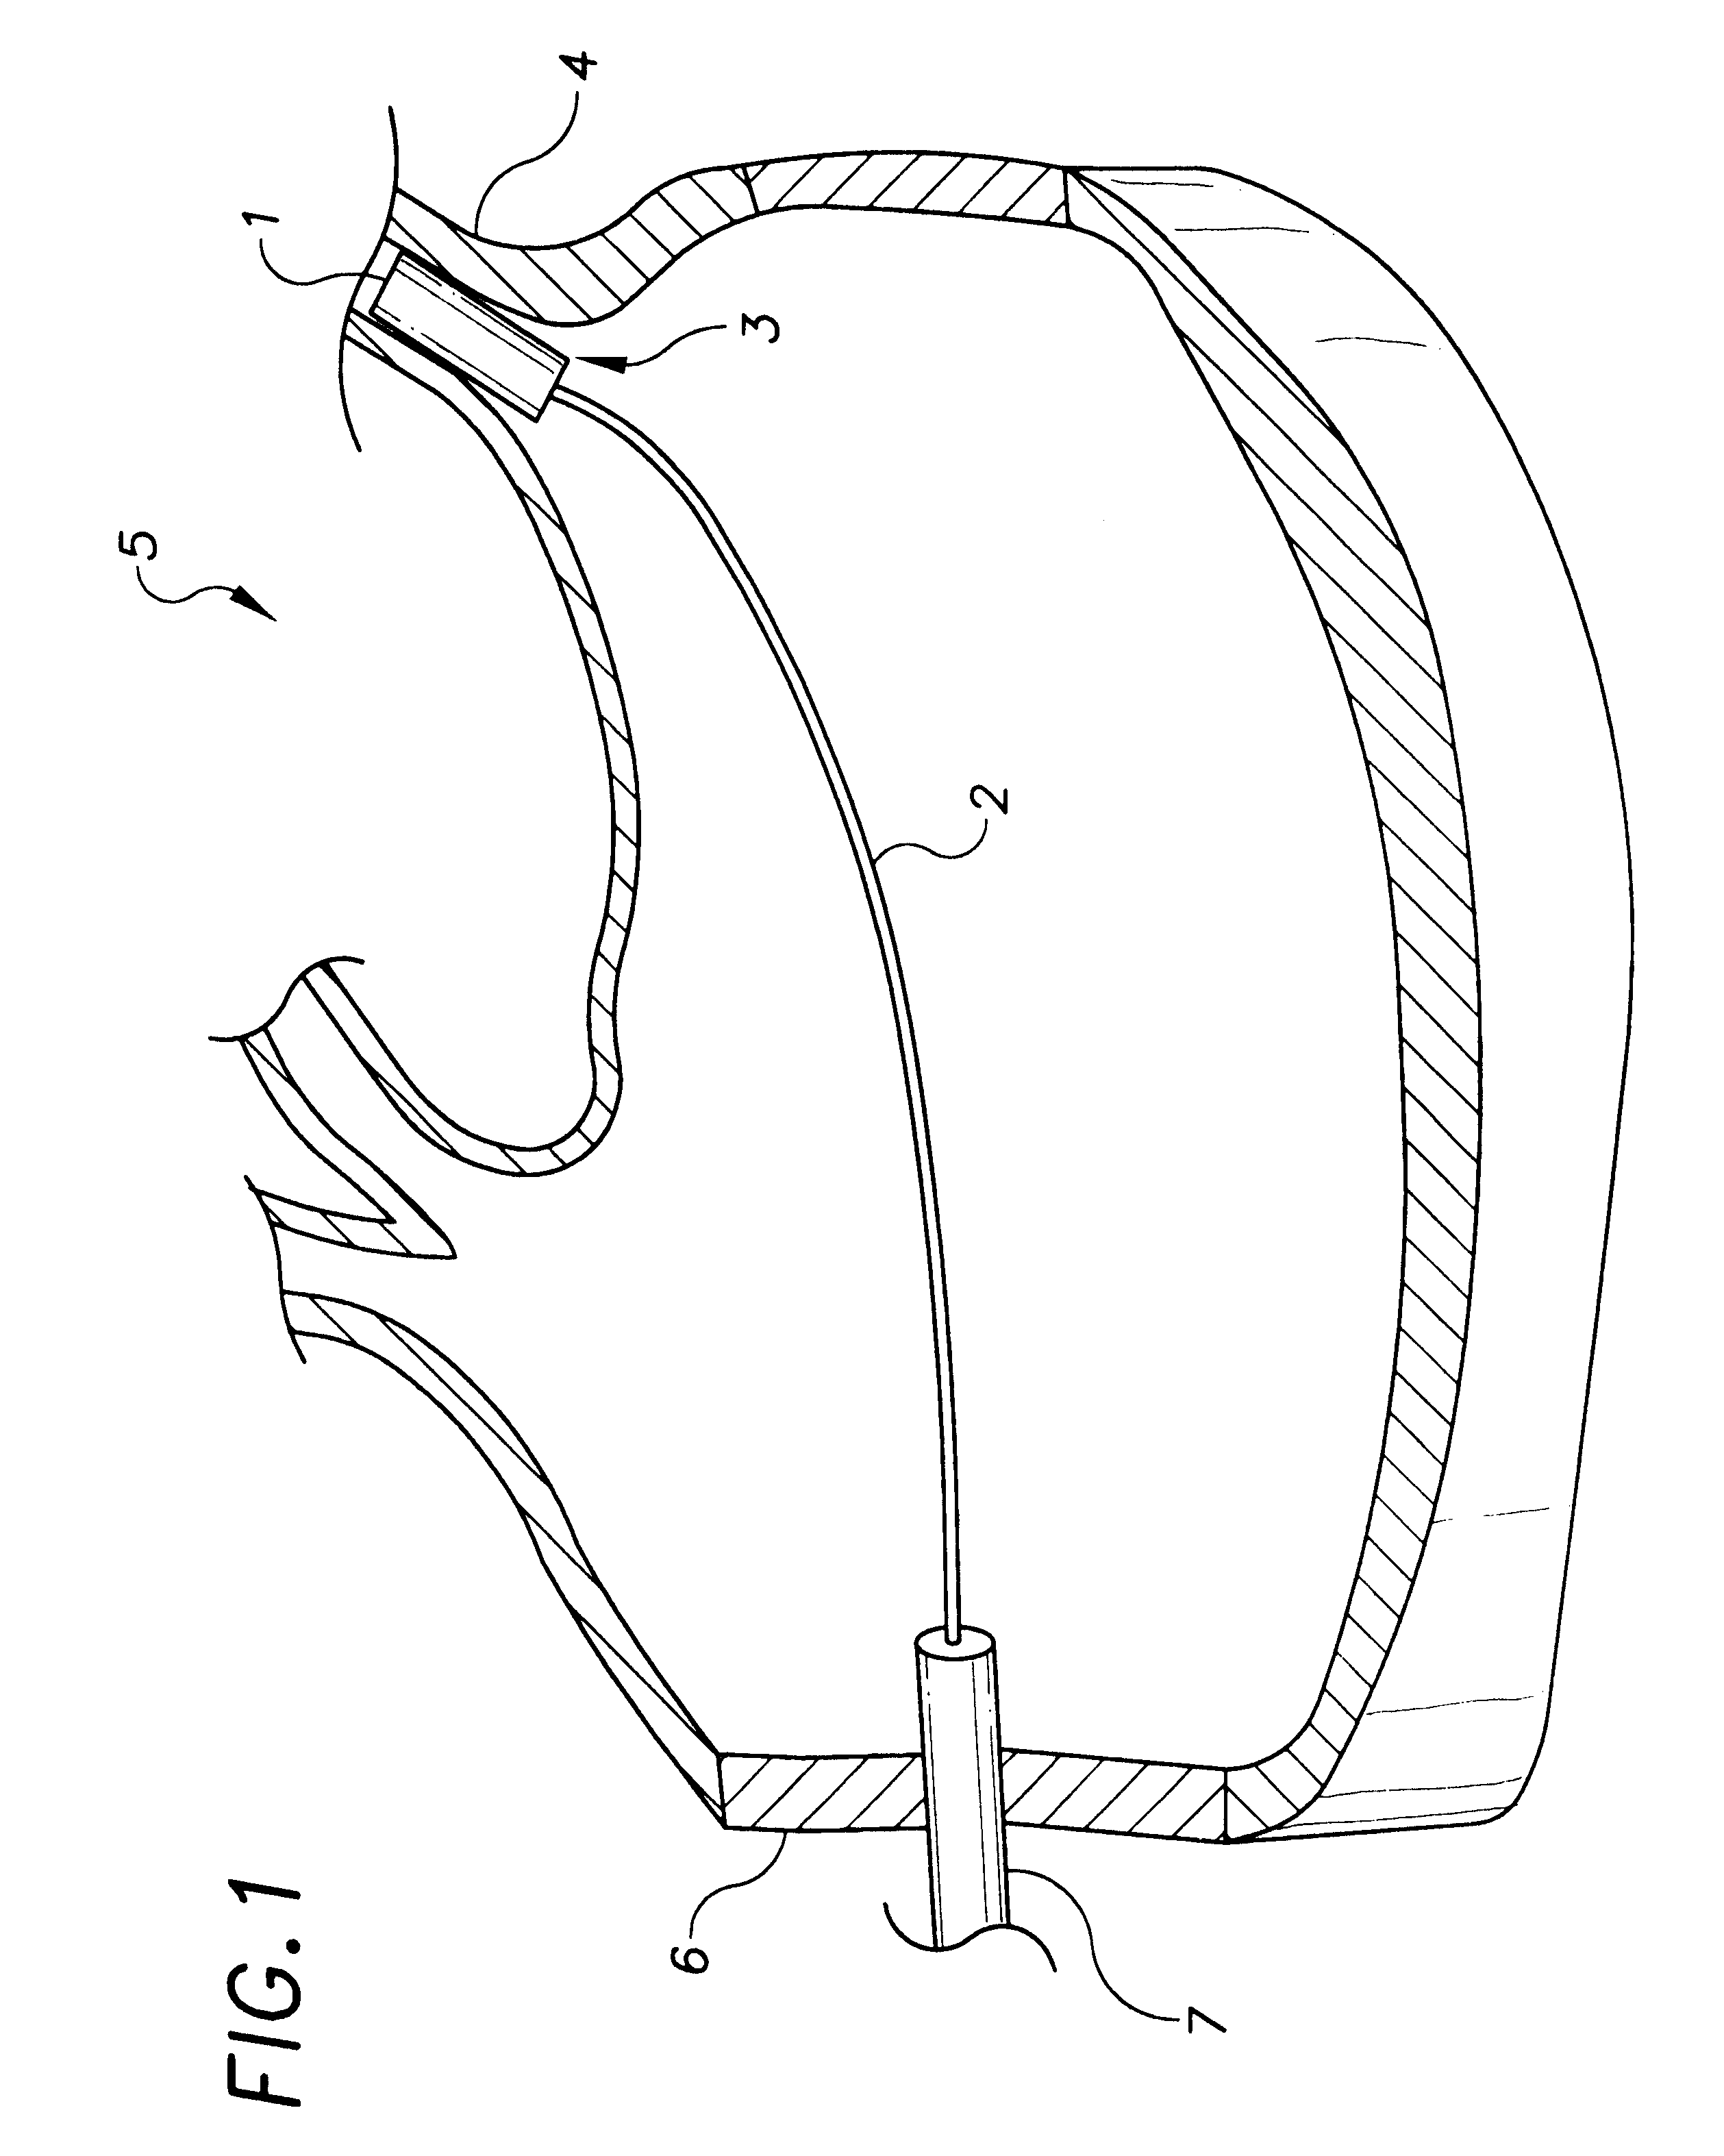 Pulmonary vein stent and method for use